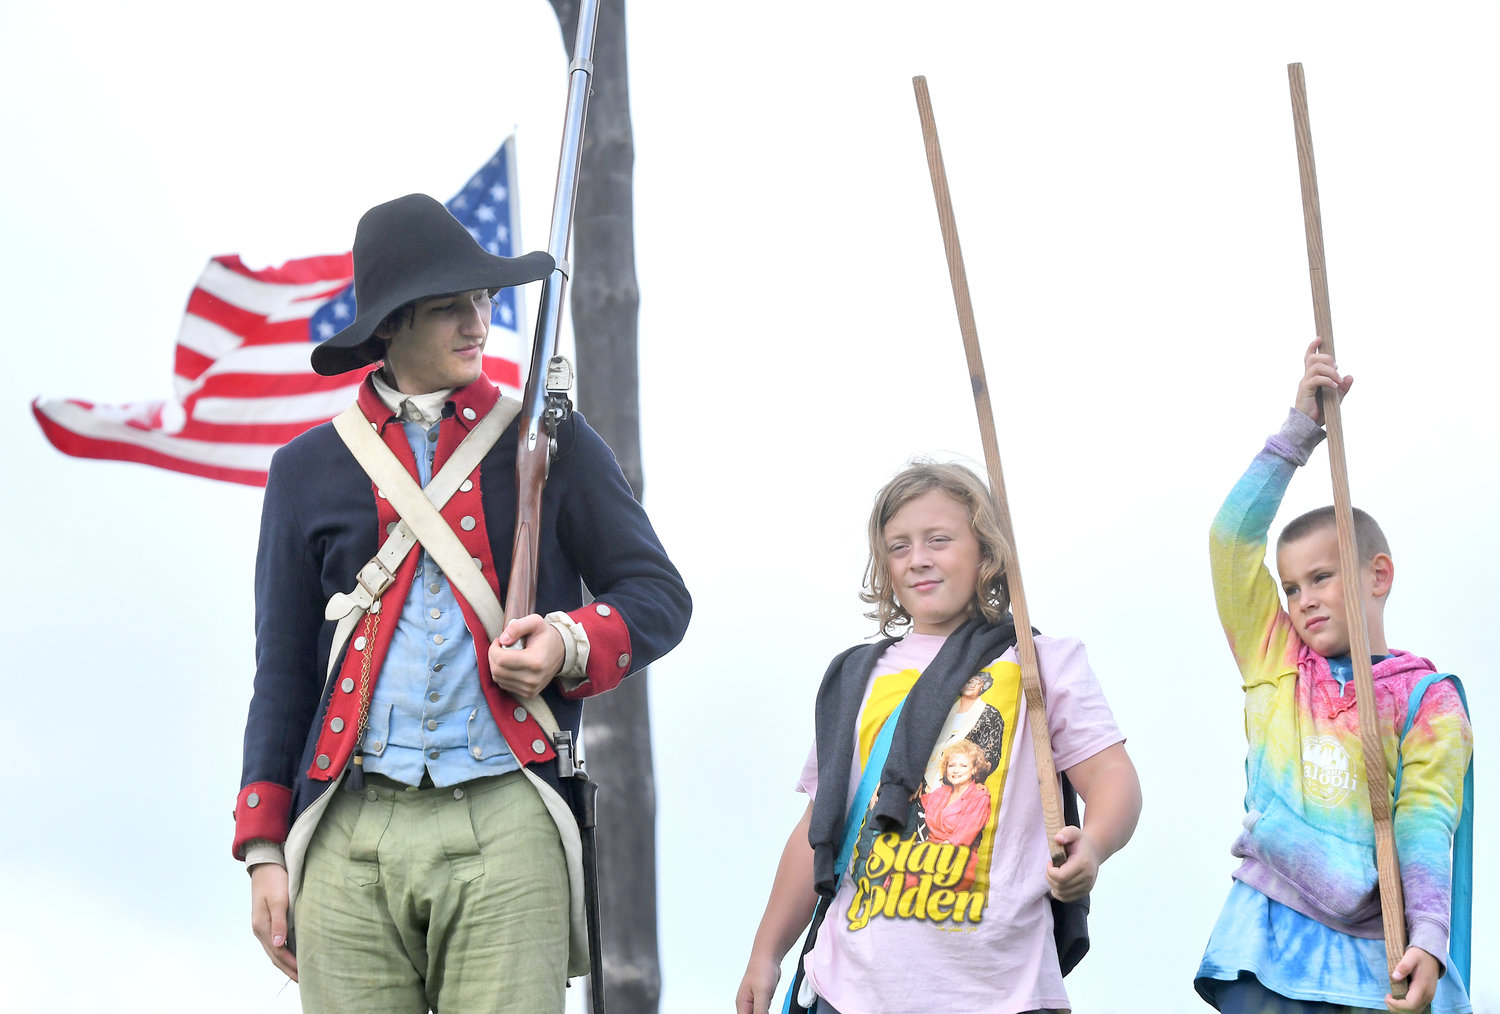 Oliver Lee, 10, and his brother Finnegan, 7, shoulder their 'muskets' under the guidance of 3rd NY Regiment Private Elijah Braun, left, during a musket drill Wednesday at Fort Stanwix in Rome during its Homeschool Day.